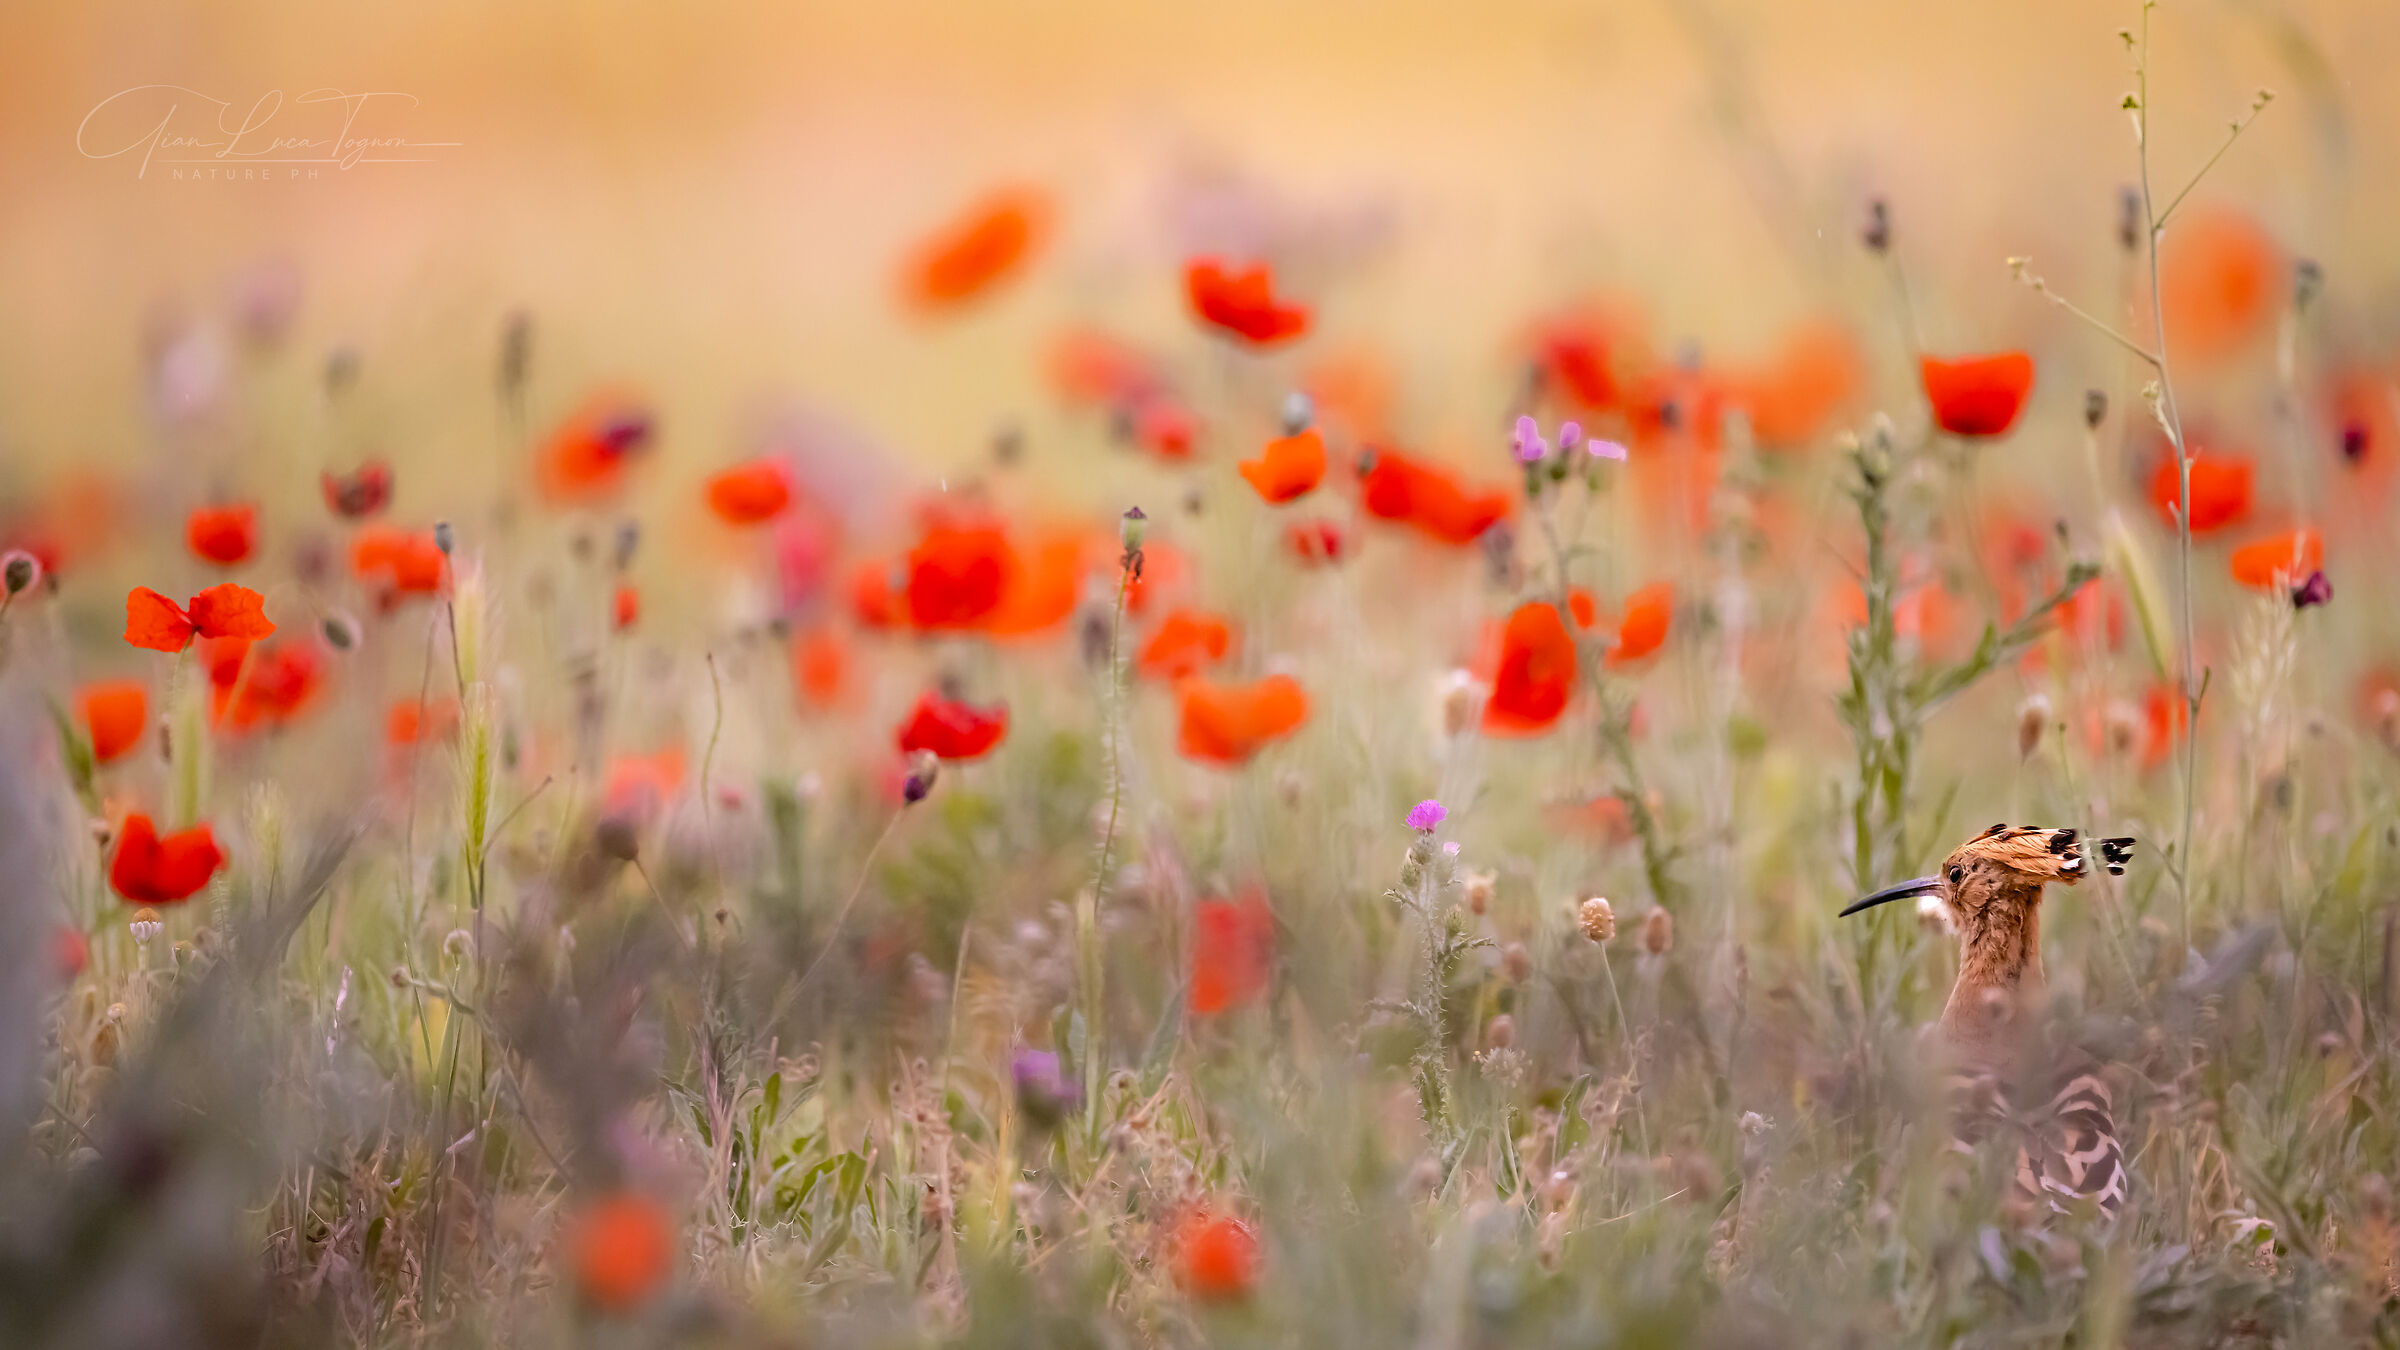 among poppies | among the poppies...